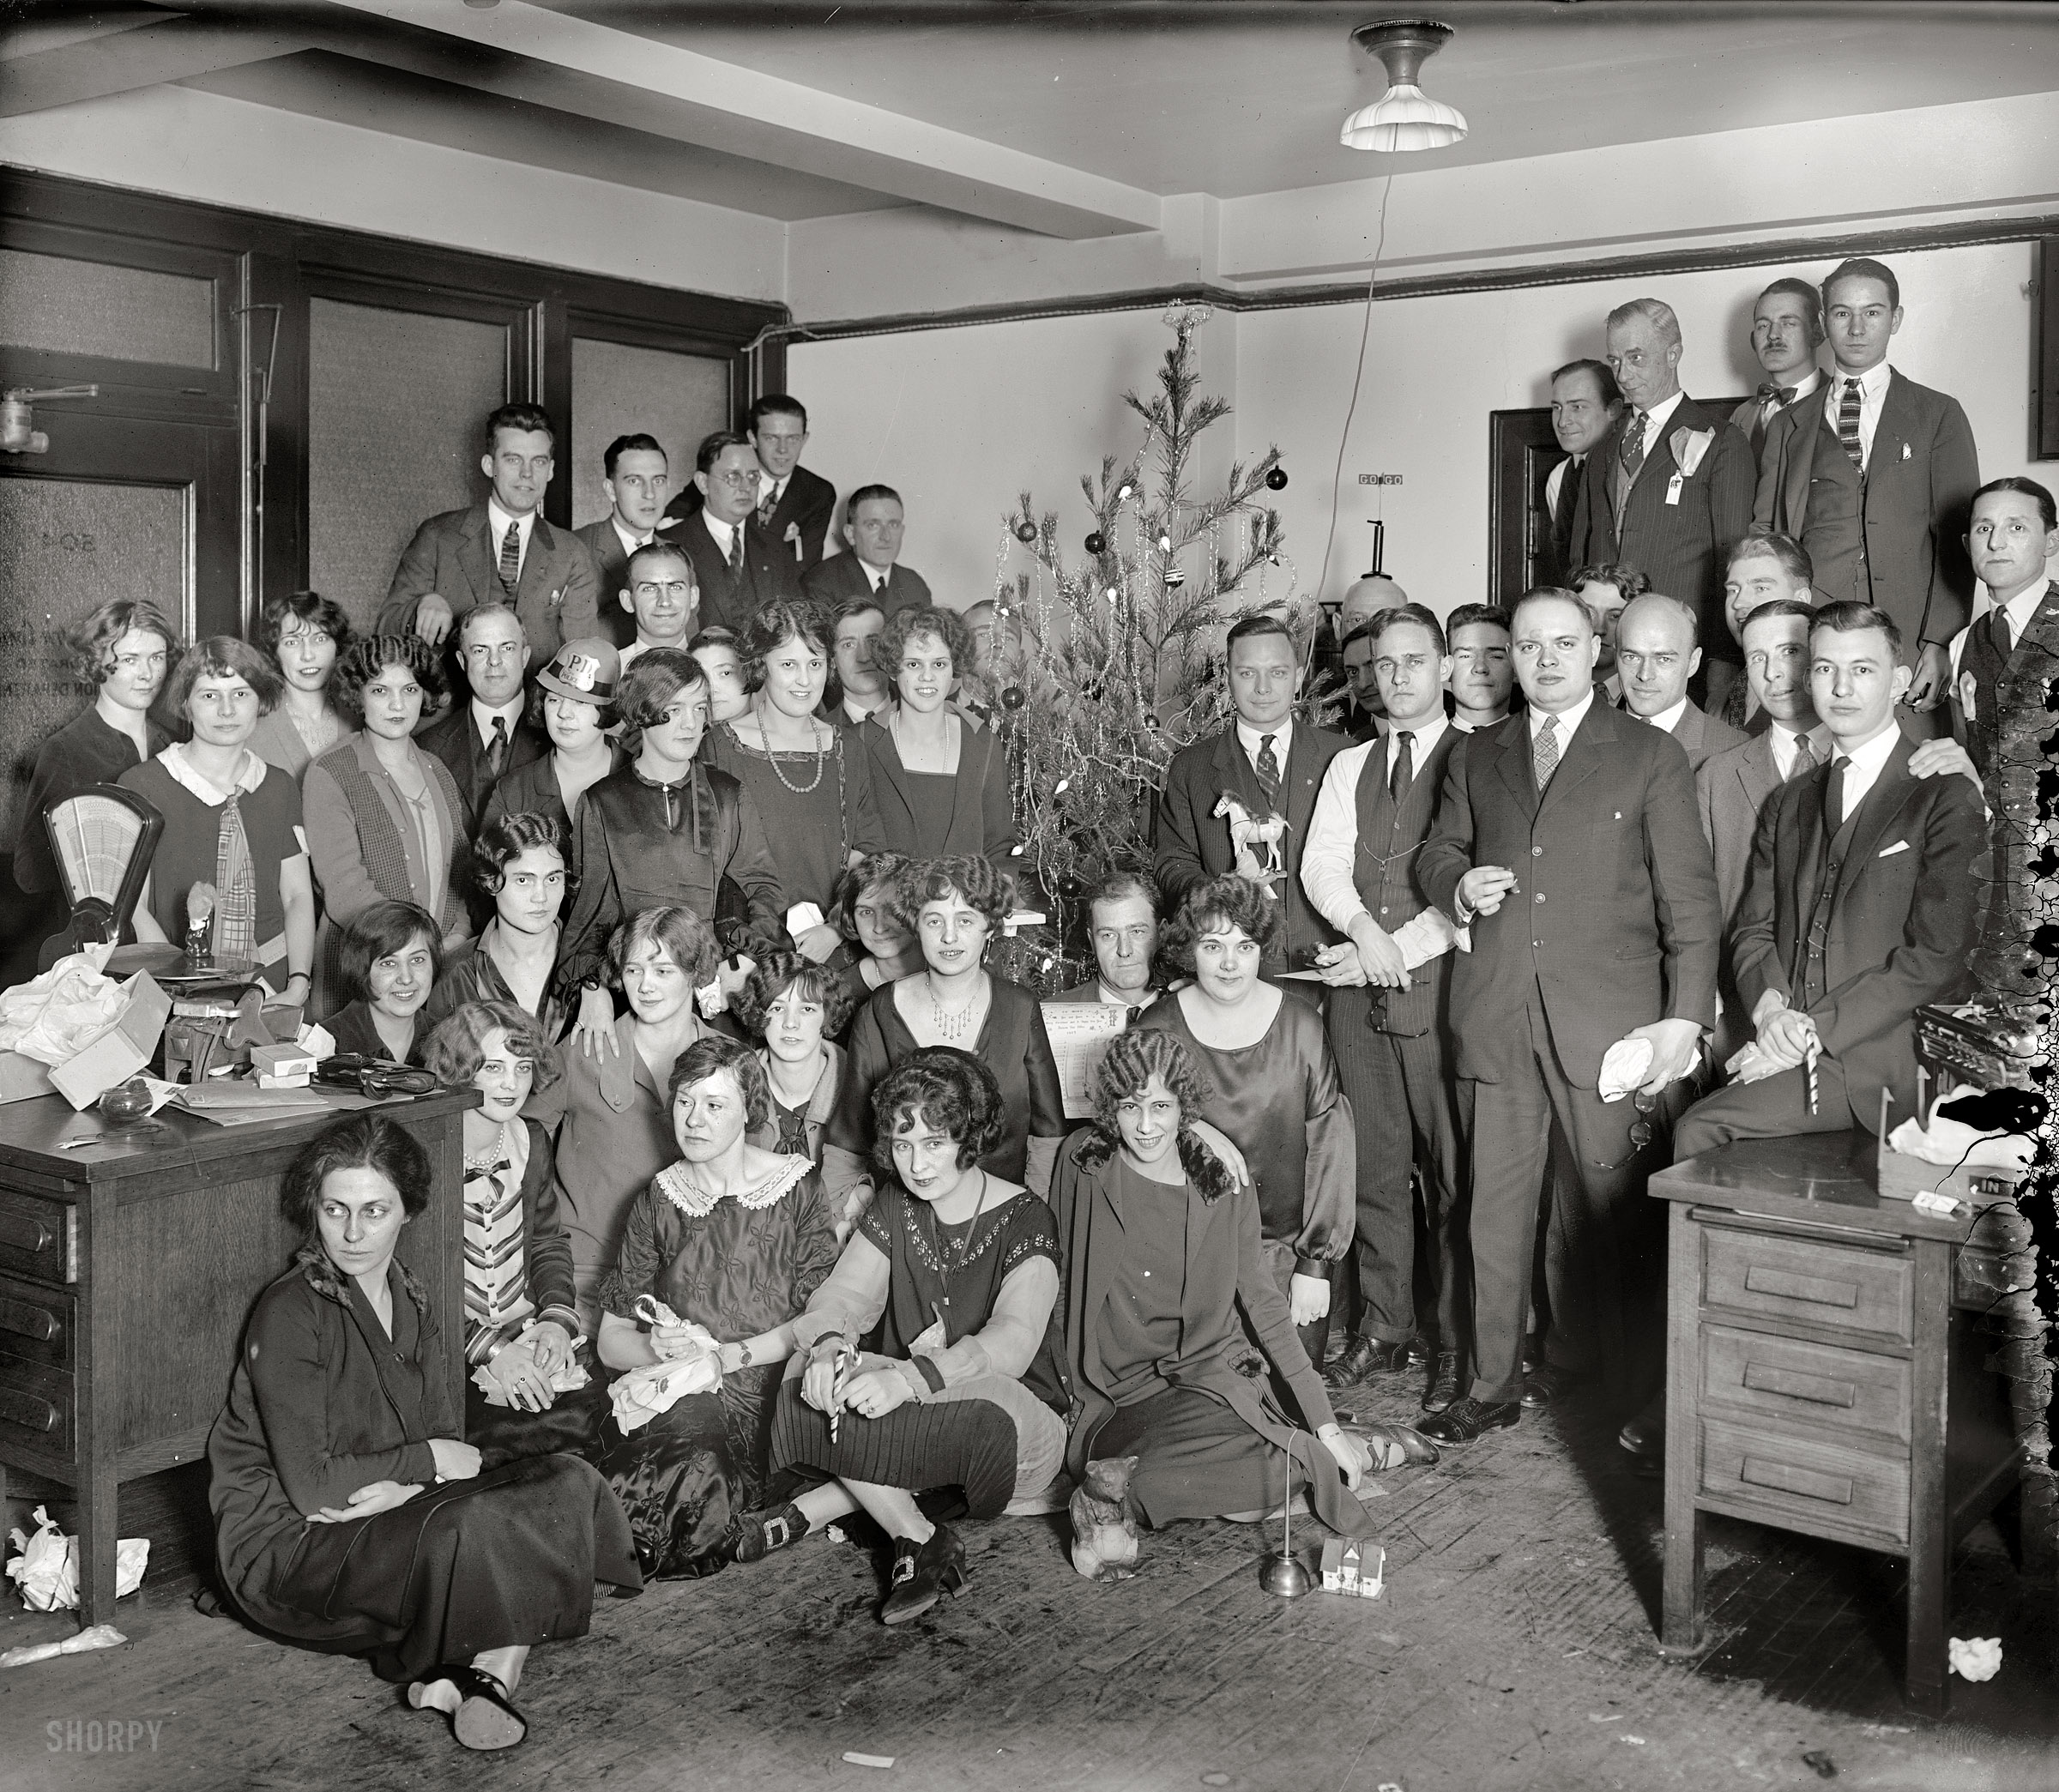 &nbsp; &nbsp; &nbsp; &nbsp; It's the week before Christmas, time for a hallowed holiday tradition here at Shorpy: The Office Xmas Party! Which has been going on for 97 years now. Will Clarence in Sales ever get up the nerve to ask out Hermione from Accounting? Is there gin in that oilcan? Ask the bear.
December 1925. "Washington, D.C. -- Western Electric Co. group." There are enough little dramas playing out here to keep the forensic partyologists busy until Groundhog Day. National Photo Company Collection glass negative. View full size.